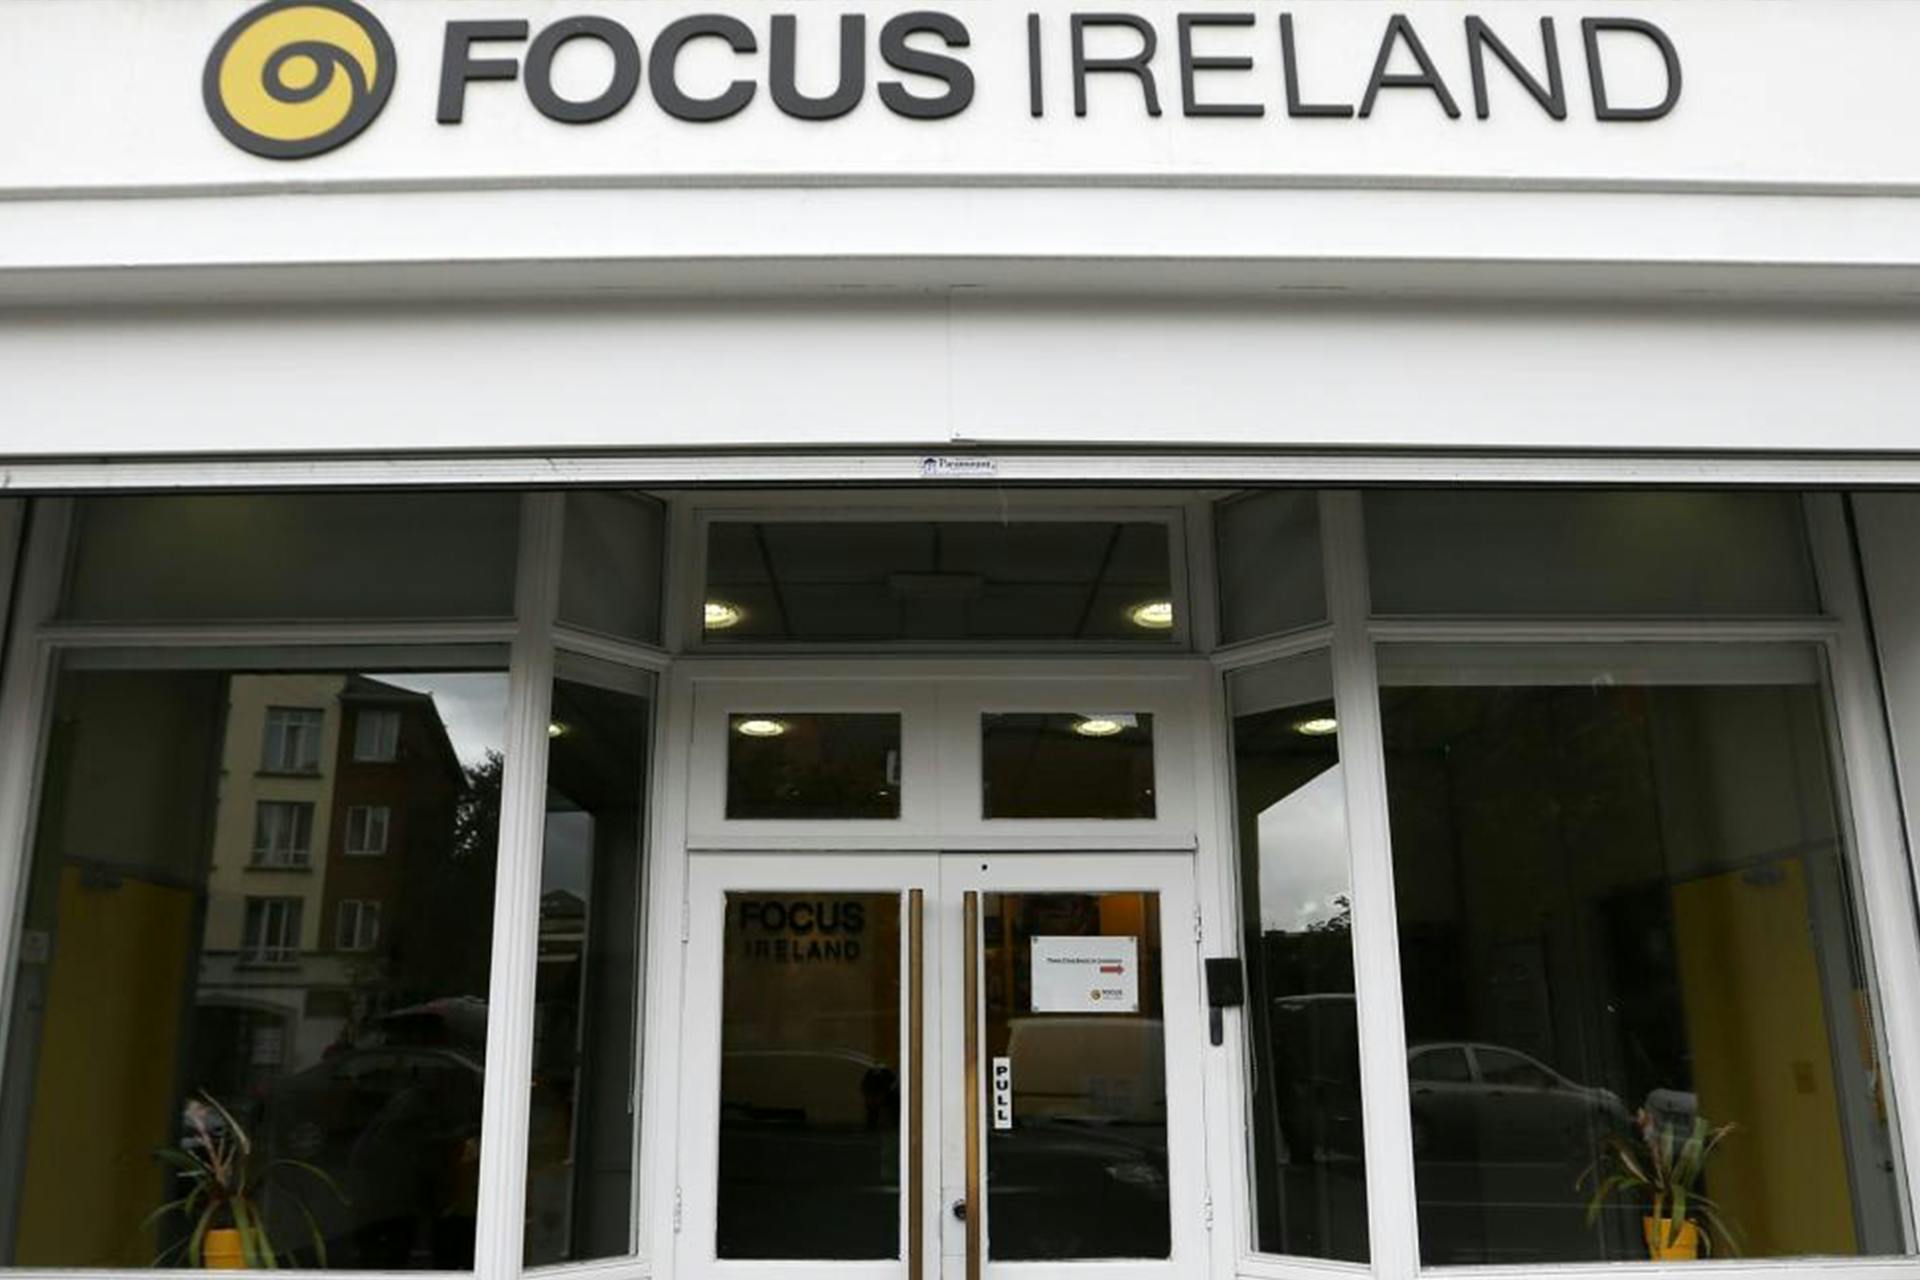 Photo of a Focus Ireland store front